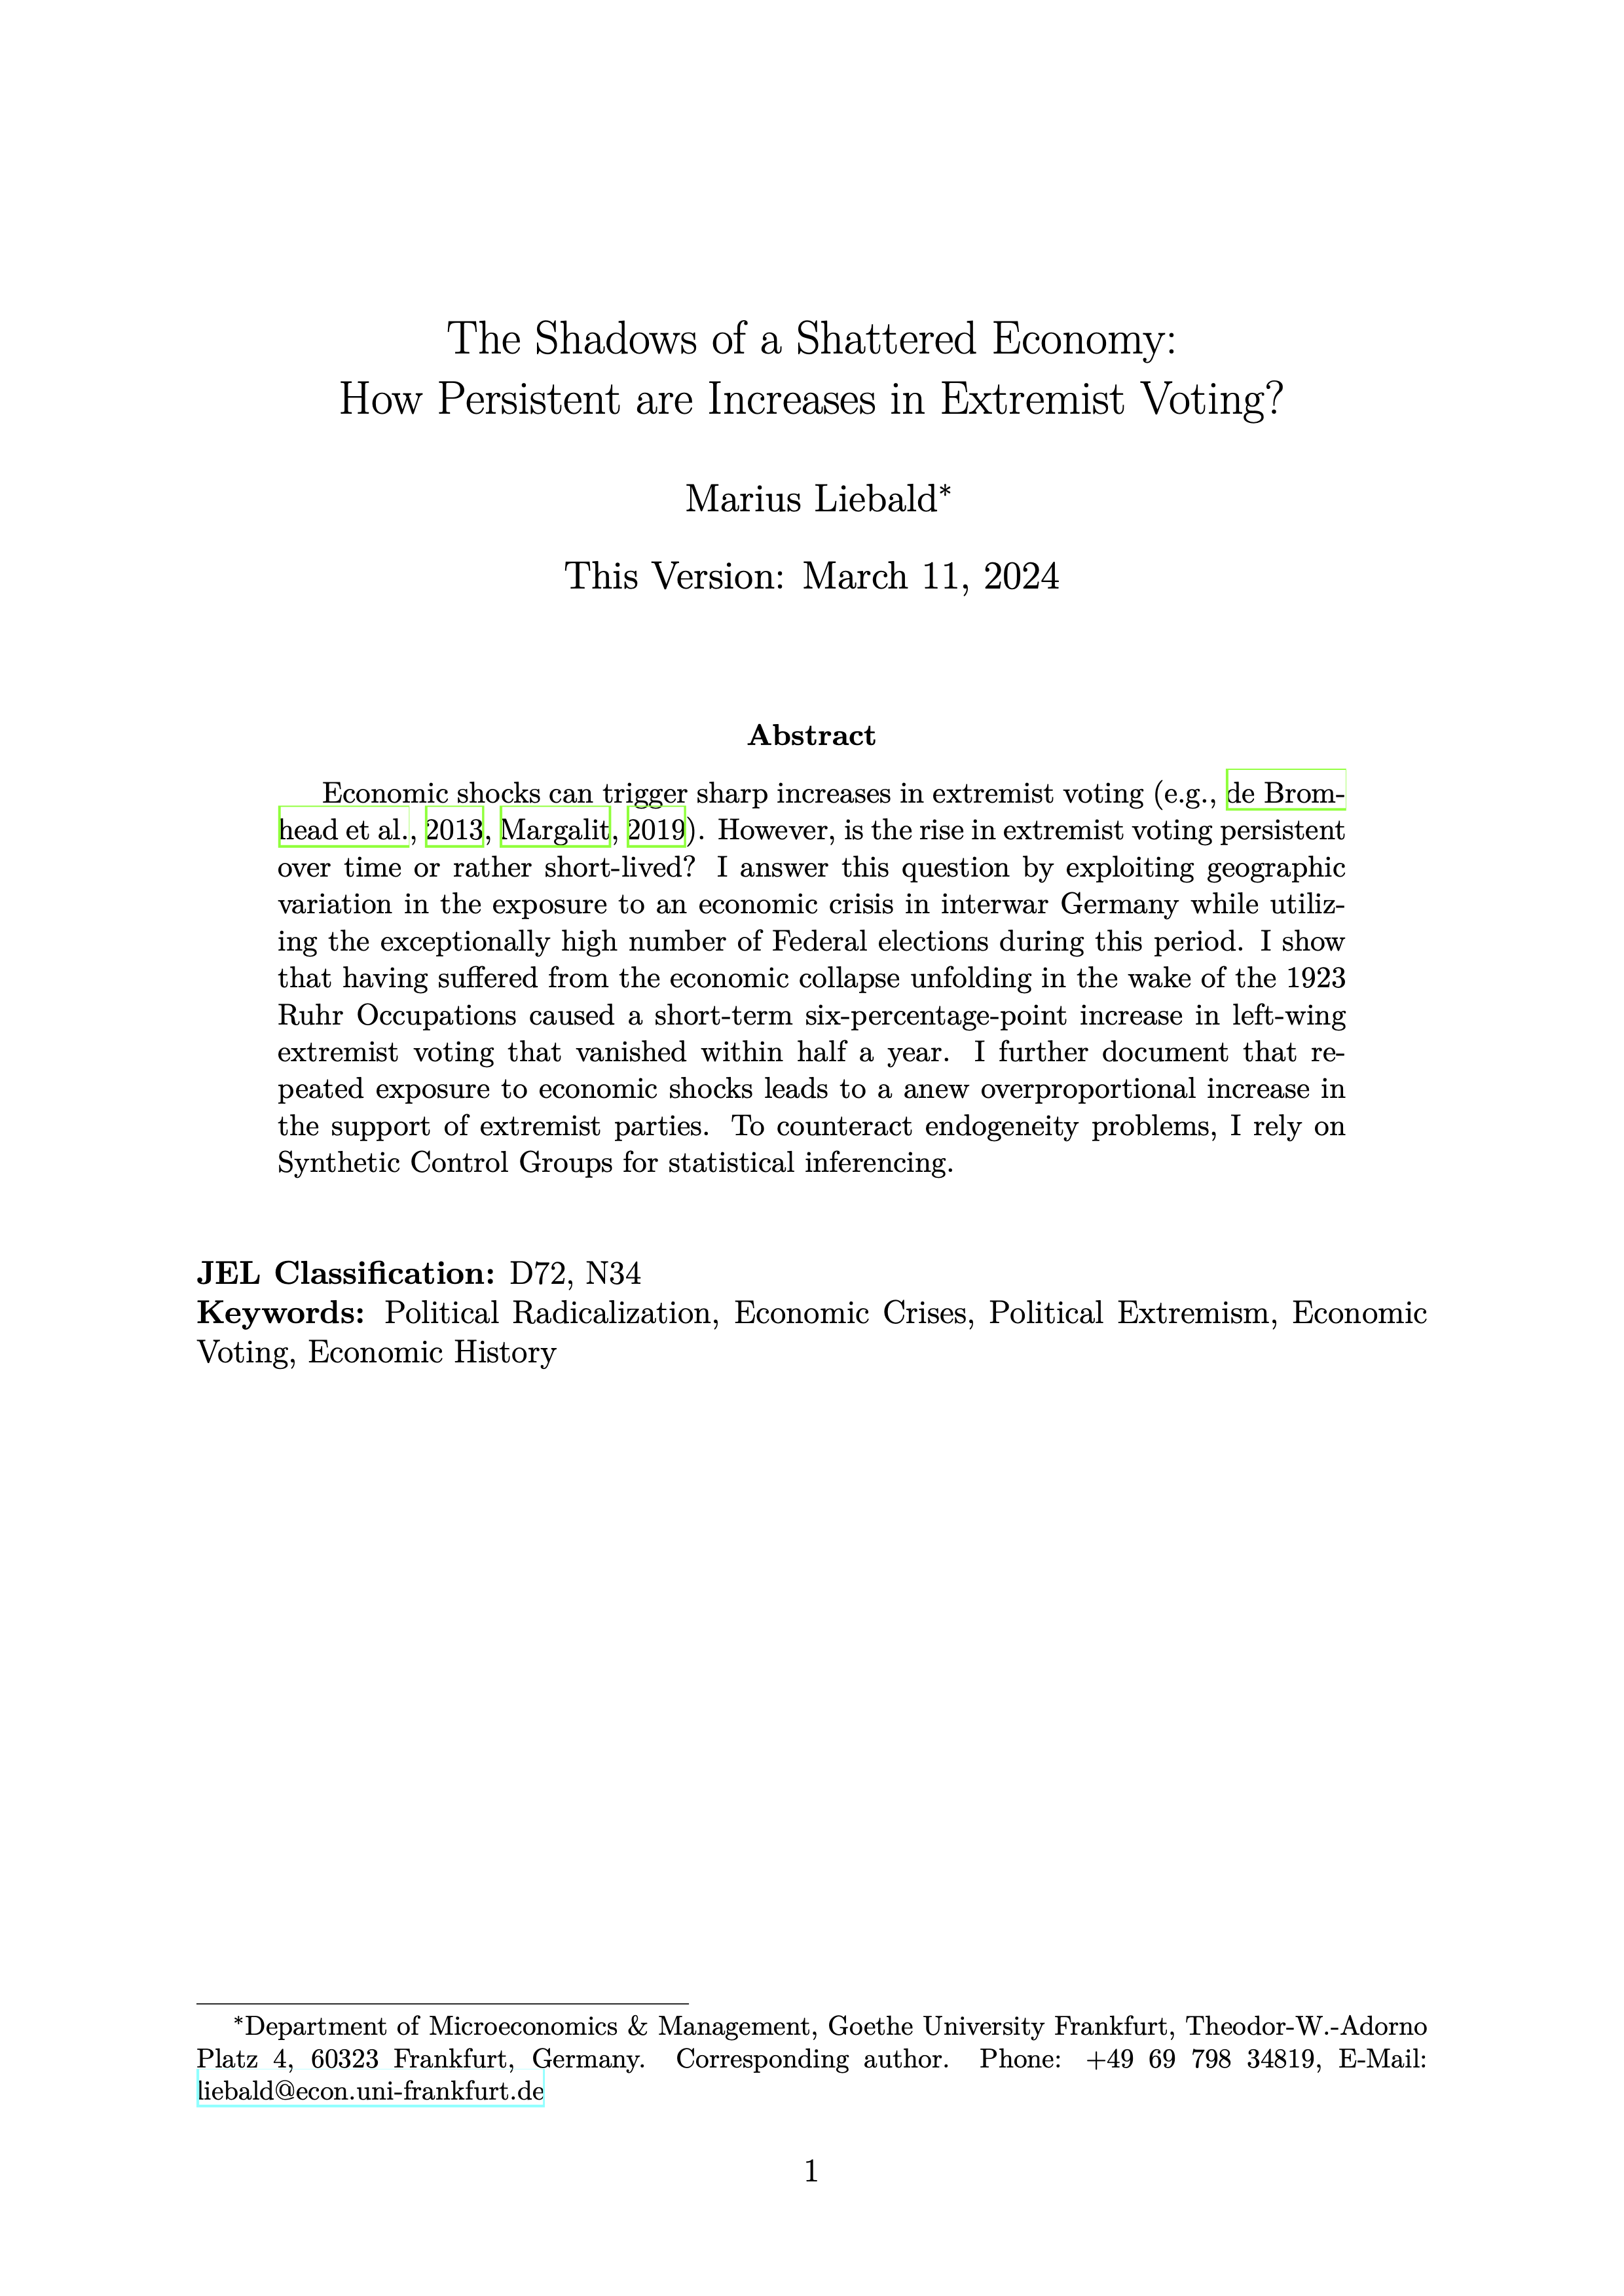 Paper: The Shadows of a Shattered Economy: How Persistent are Increases in Extremist Voting?